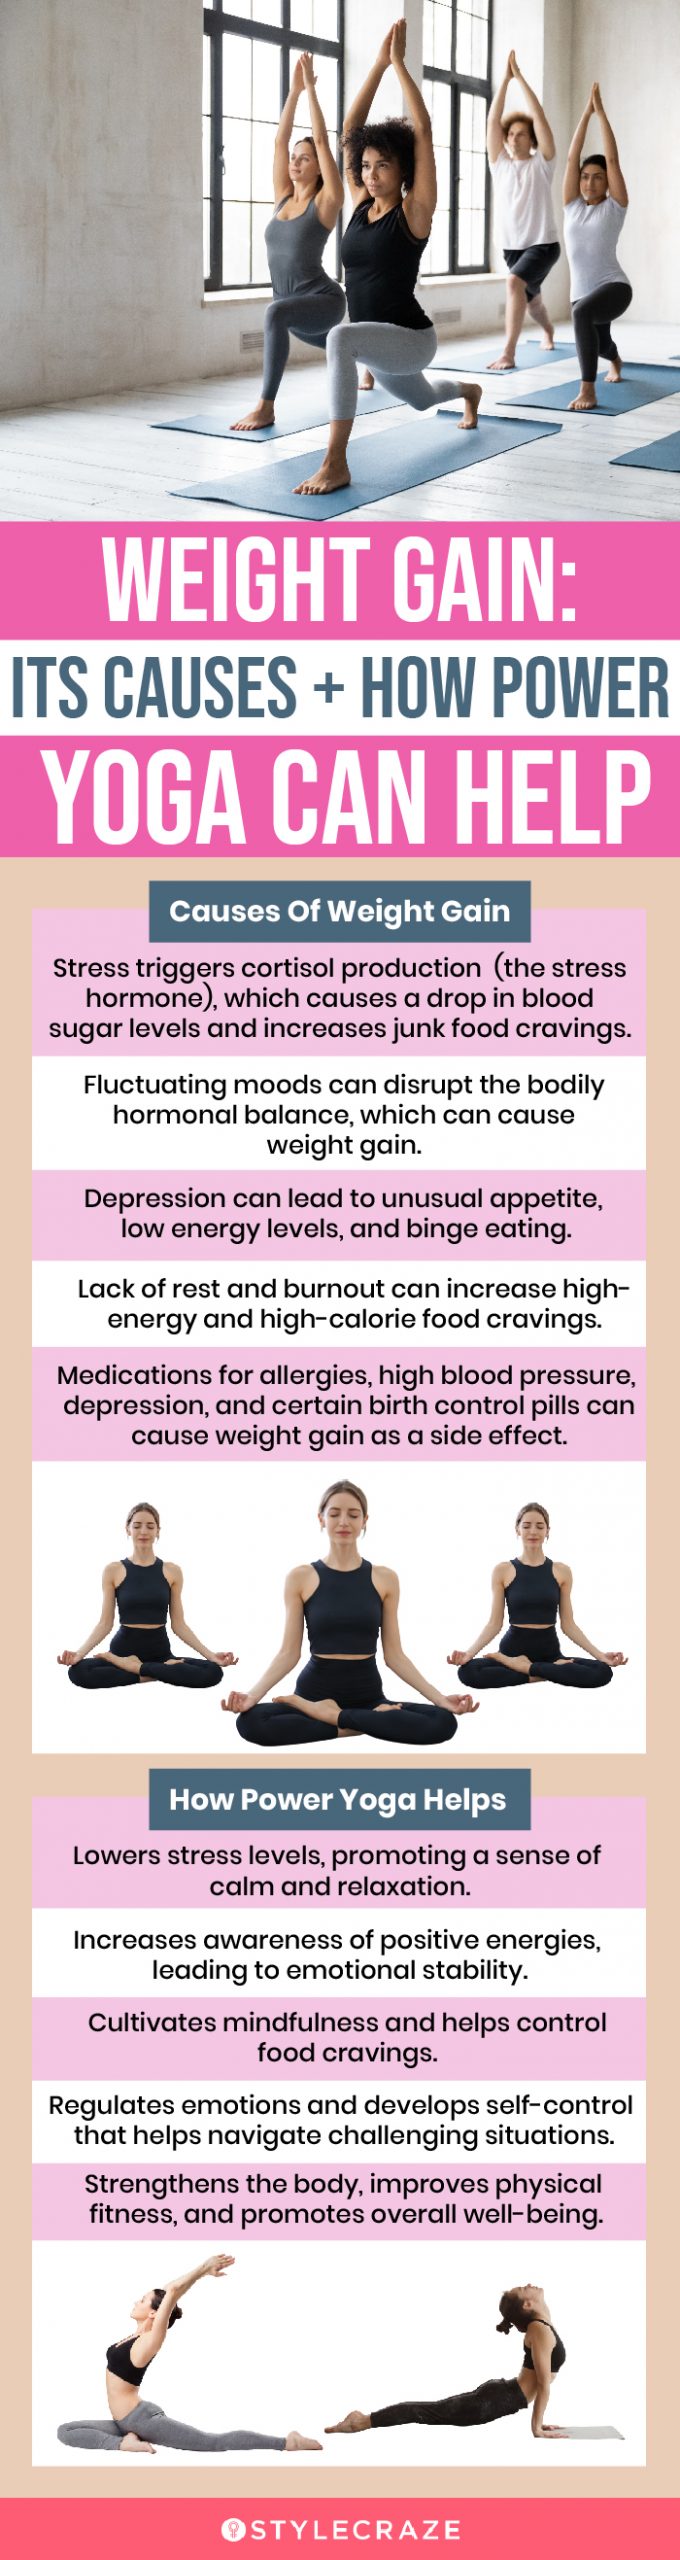 a complete guide to power yoga for weight loss (infographic)